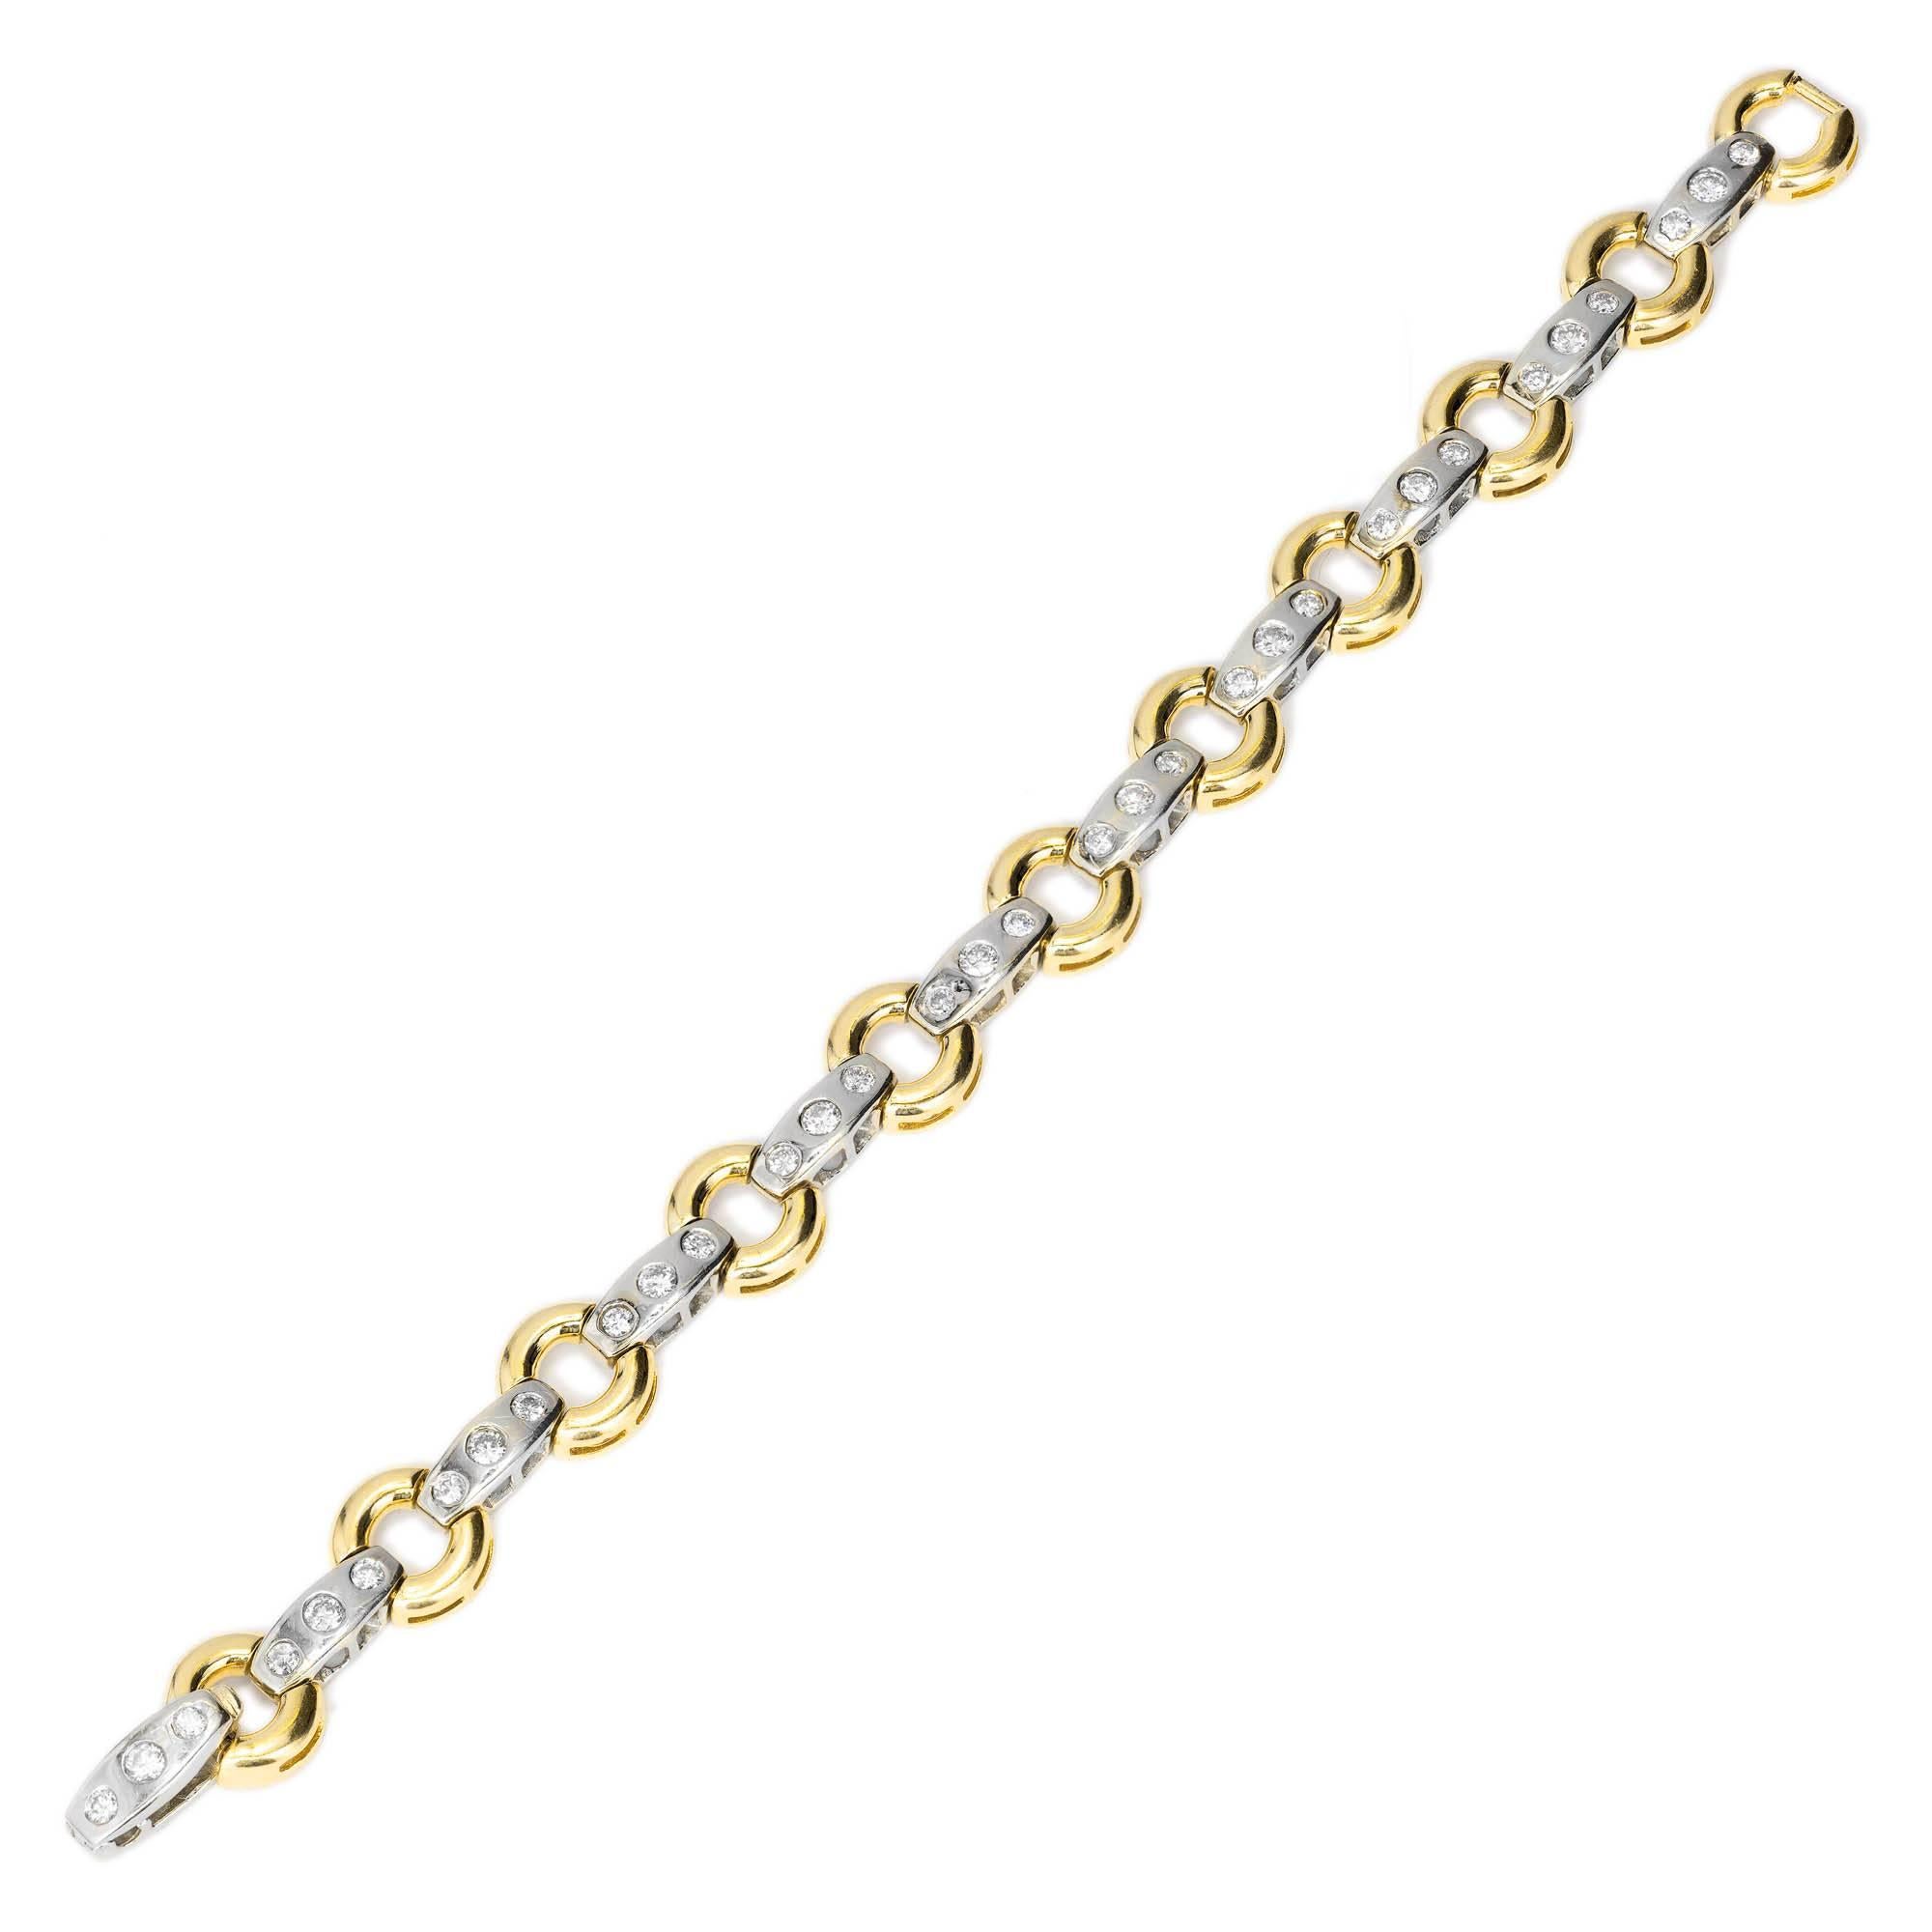 14k Yellow gold circle and white gold bar link bracelet. Well-polished and built in catch. Circa 1980.

33 round diamonds, approx. total weight 2.20ct, H, SI
14k yellow and white gold
22.0 grams
Tested and stamped: 14k
Hallmark: D
Length: 7